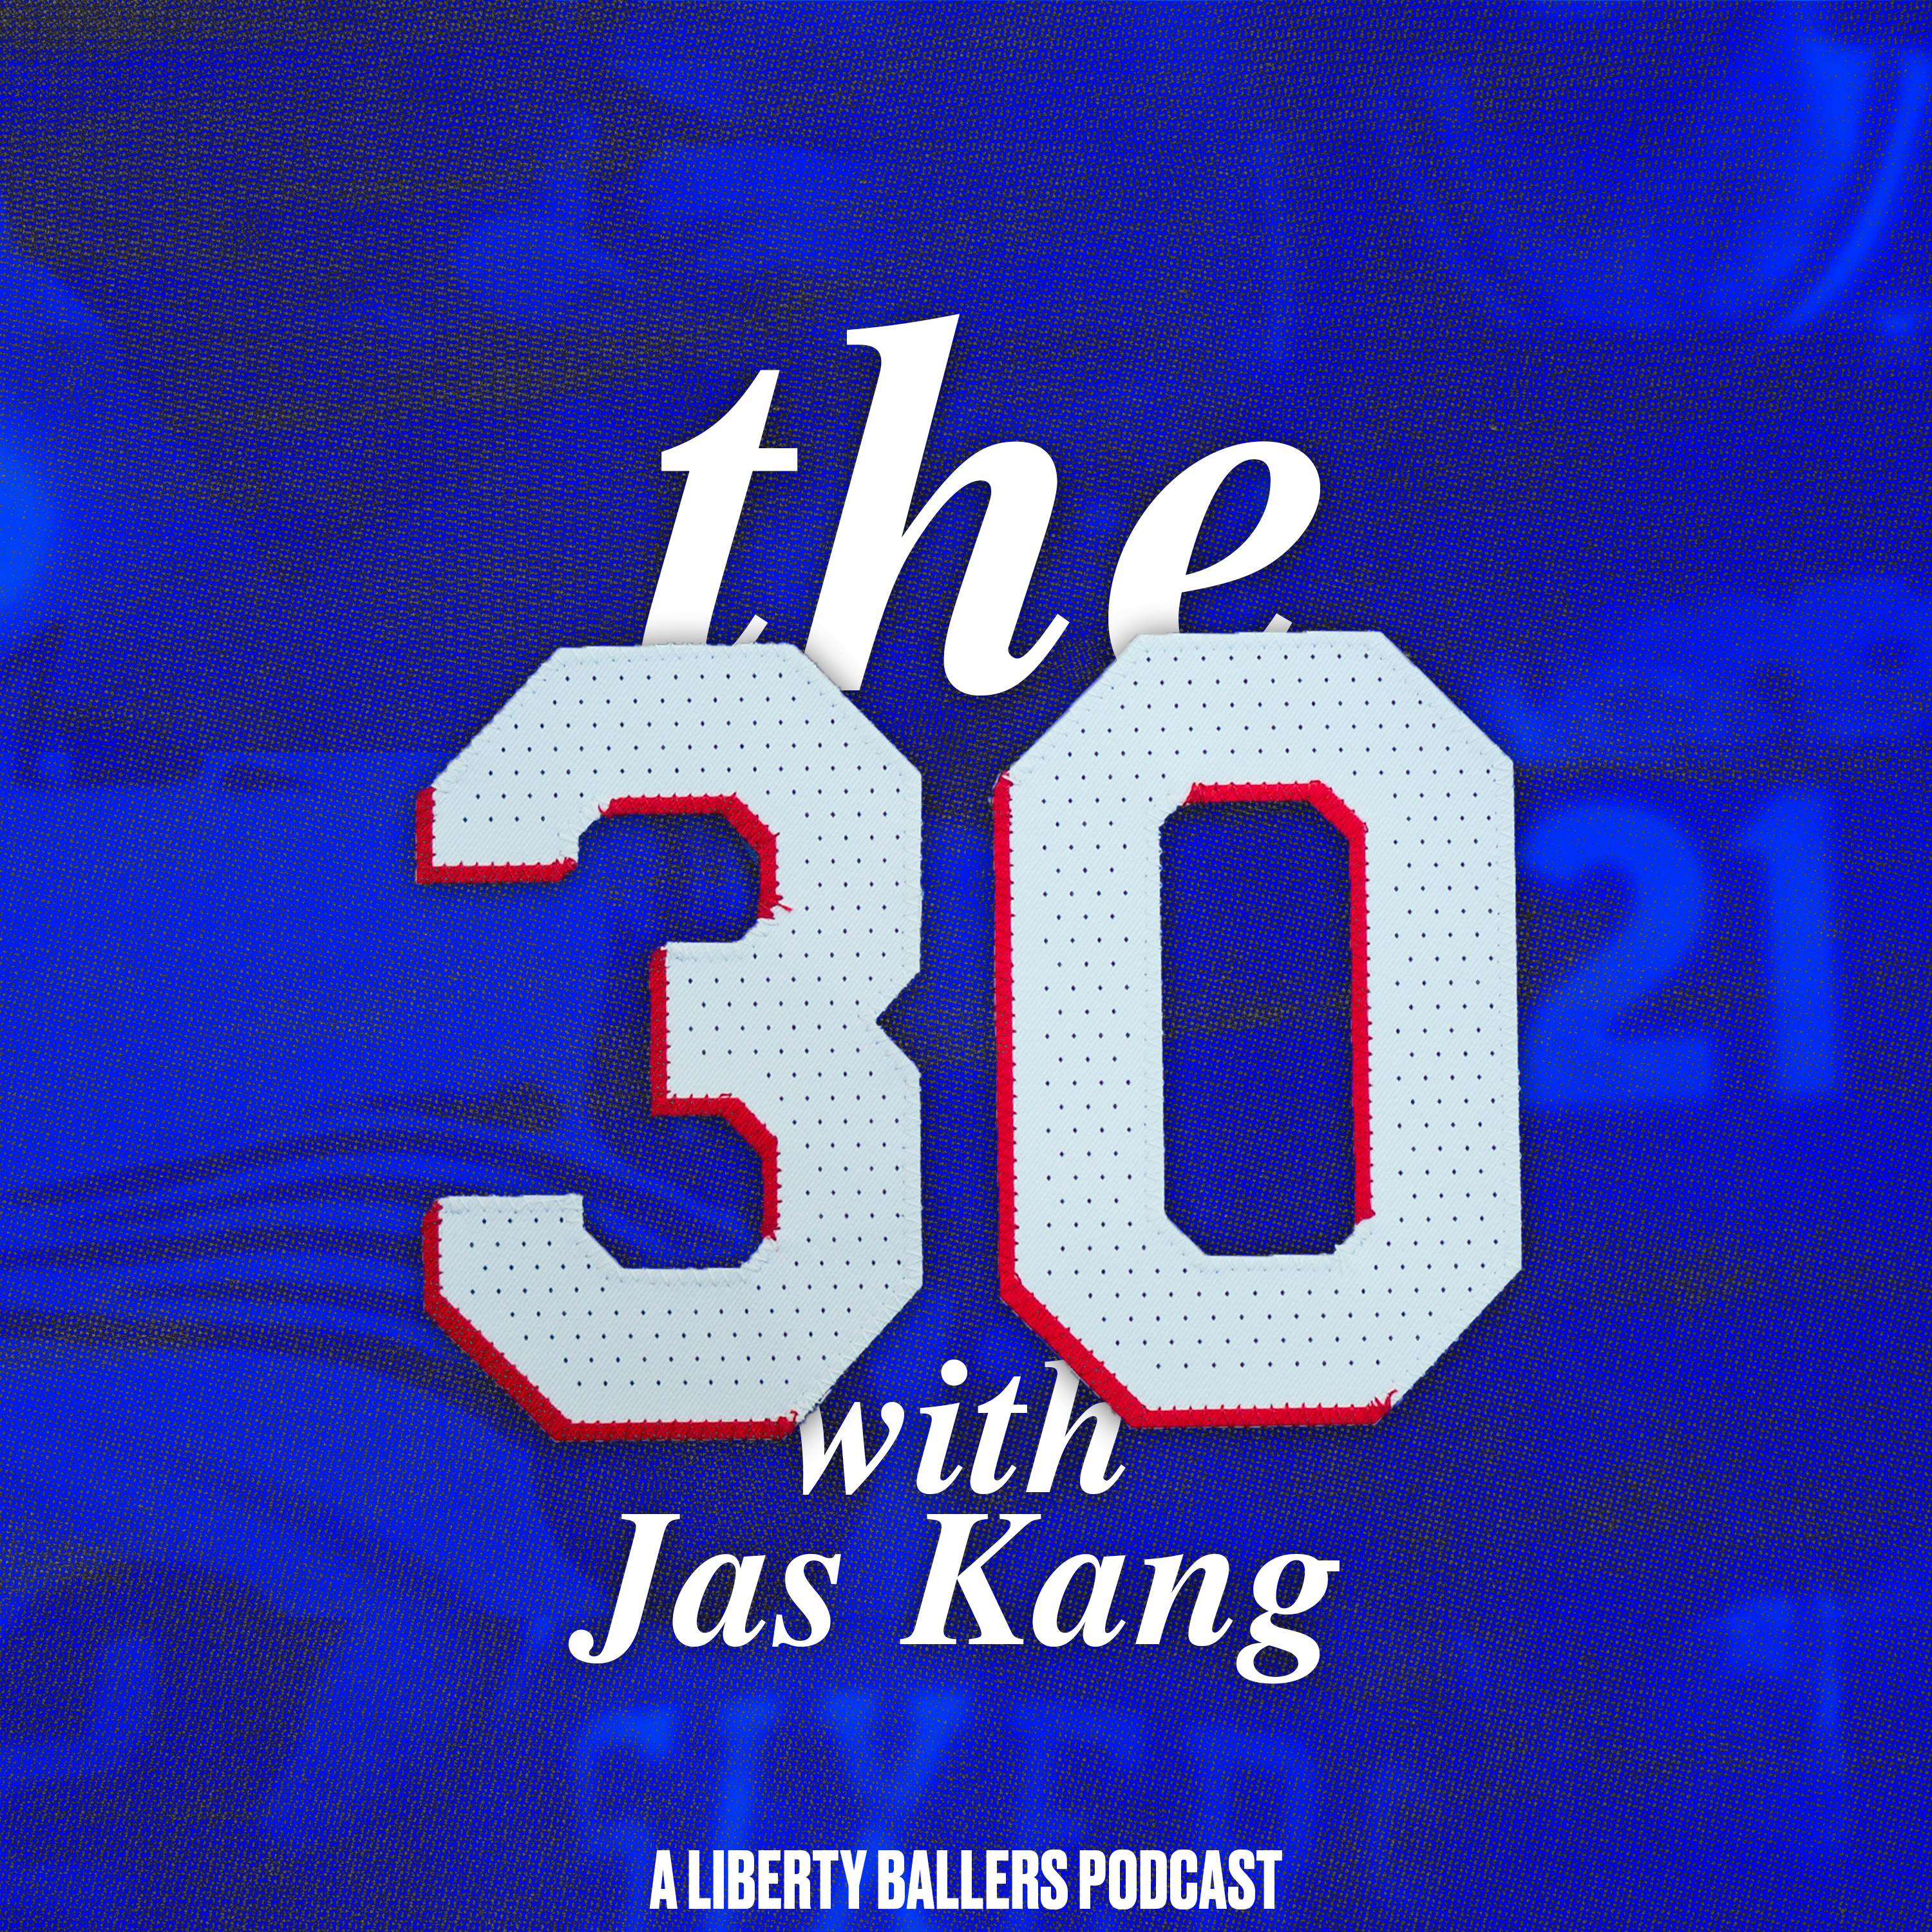 The 30 (Part 1): Paul Hudrick joins Jas to recap the first week of the Sixers' season, plus they discuss Doc Rivers' future if Philly struggles and how previous coaching changes have played out in the